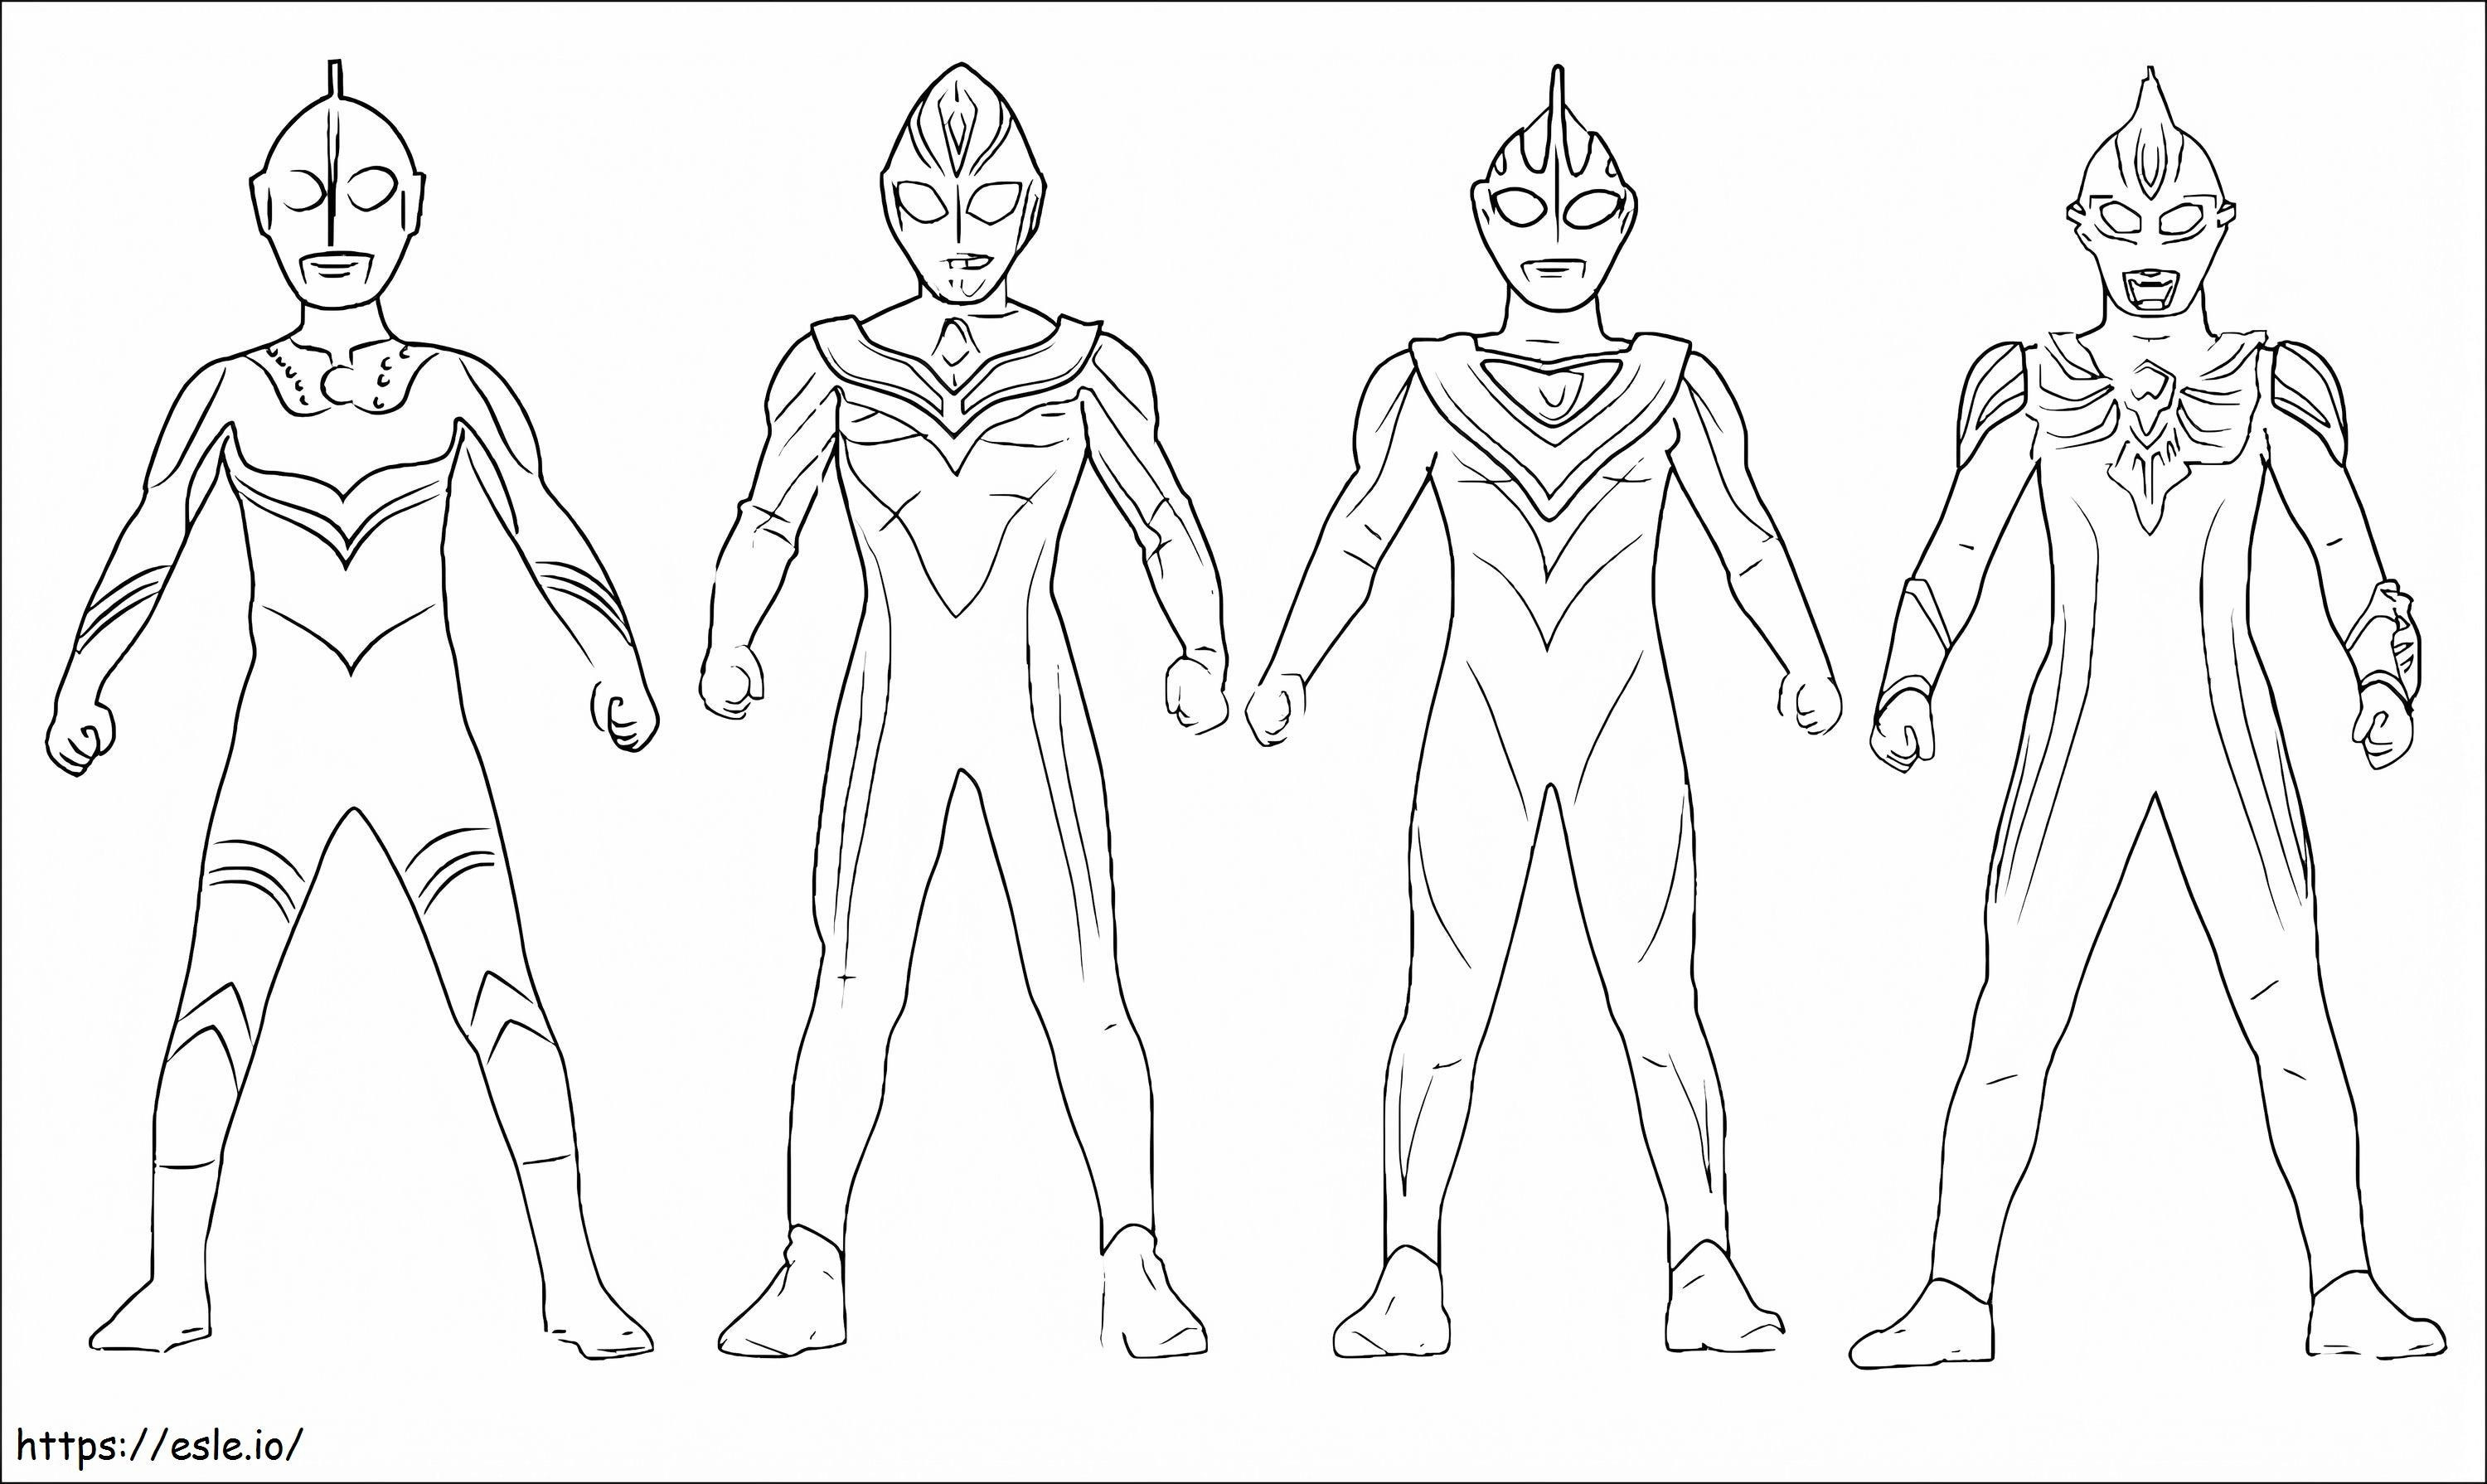 Ultraman Team 6 coloring page